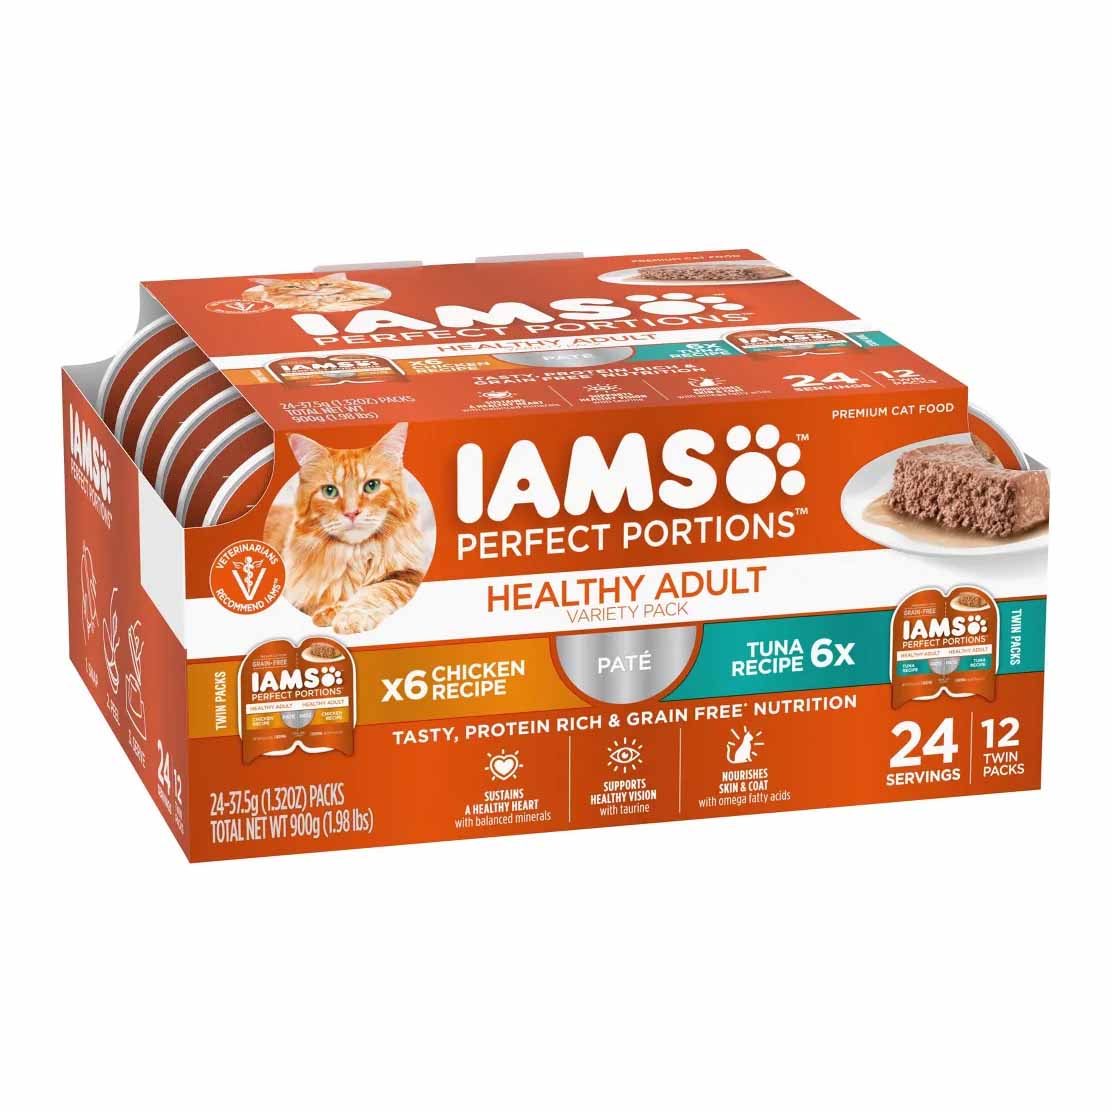 IAMS PERFECT PORTIONS Healthy Adult Grain-Free Wet Cat Food Pate Variety Pack in orange box